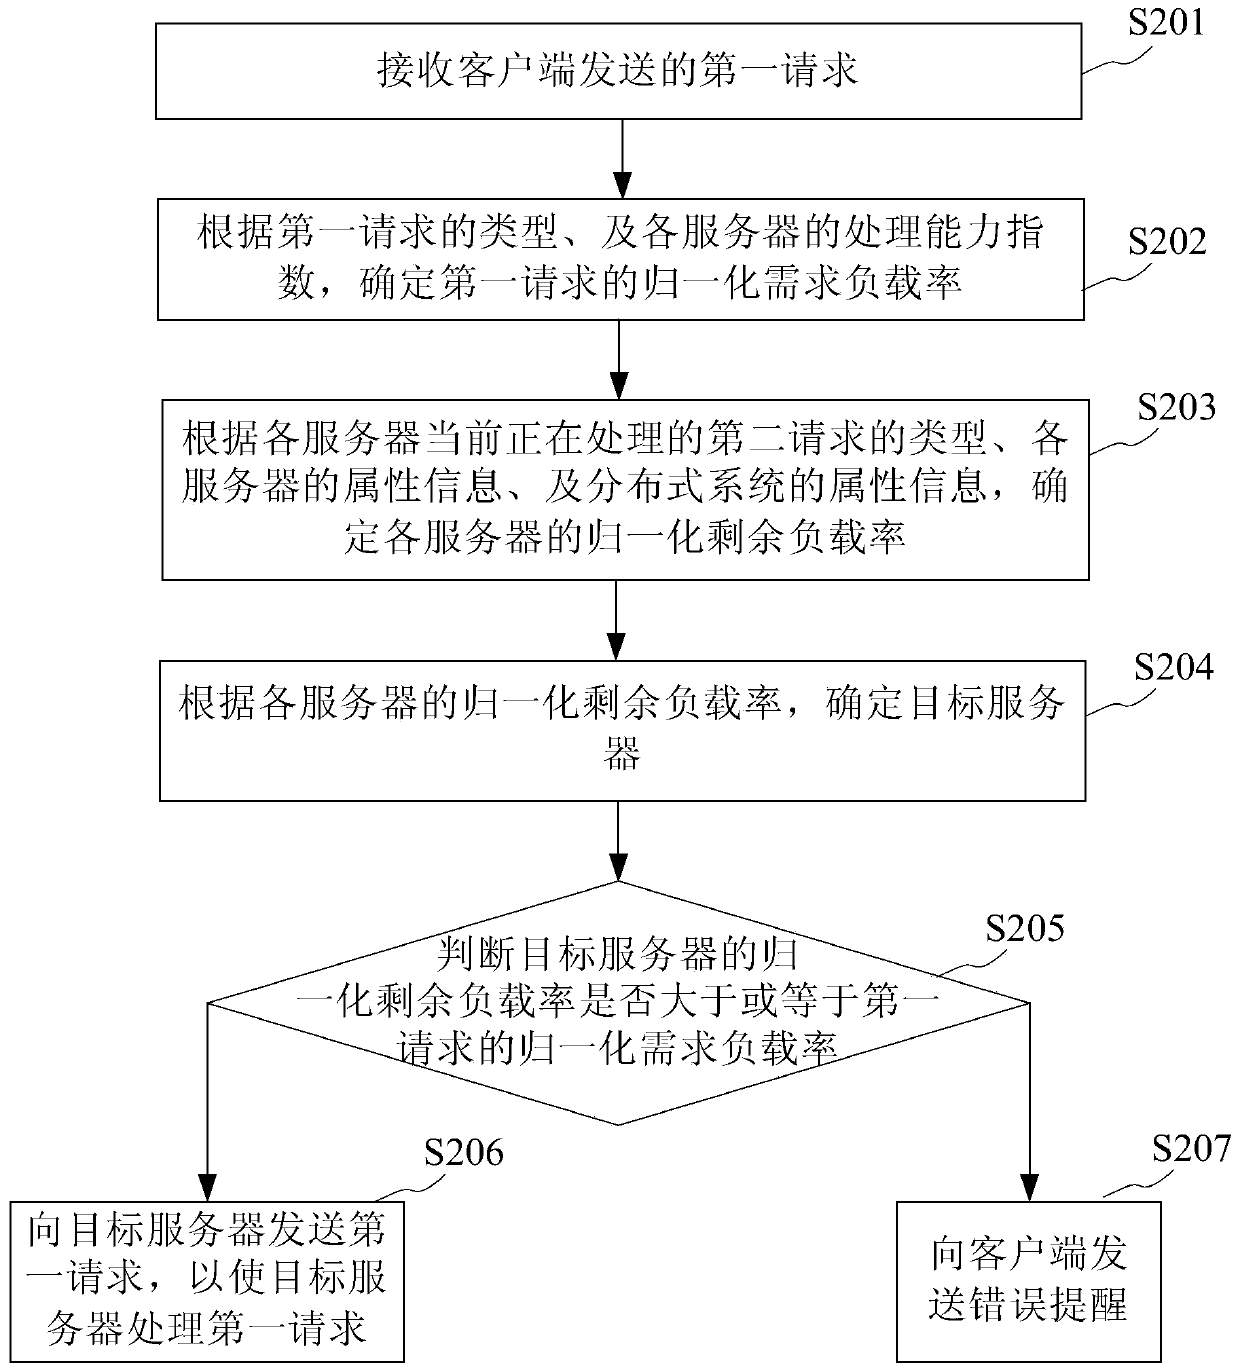 Load balancing method, equipment and distributed system